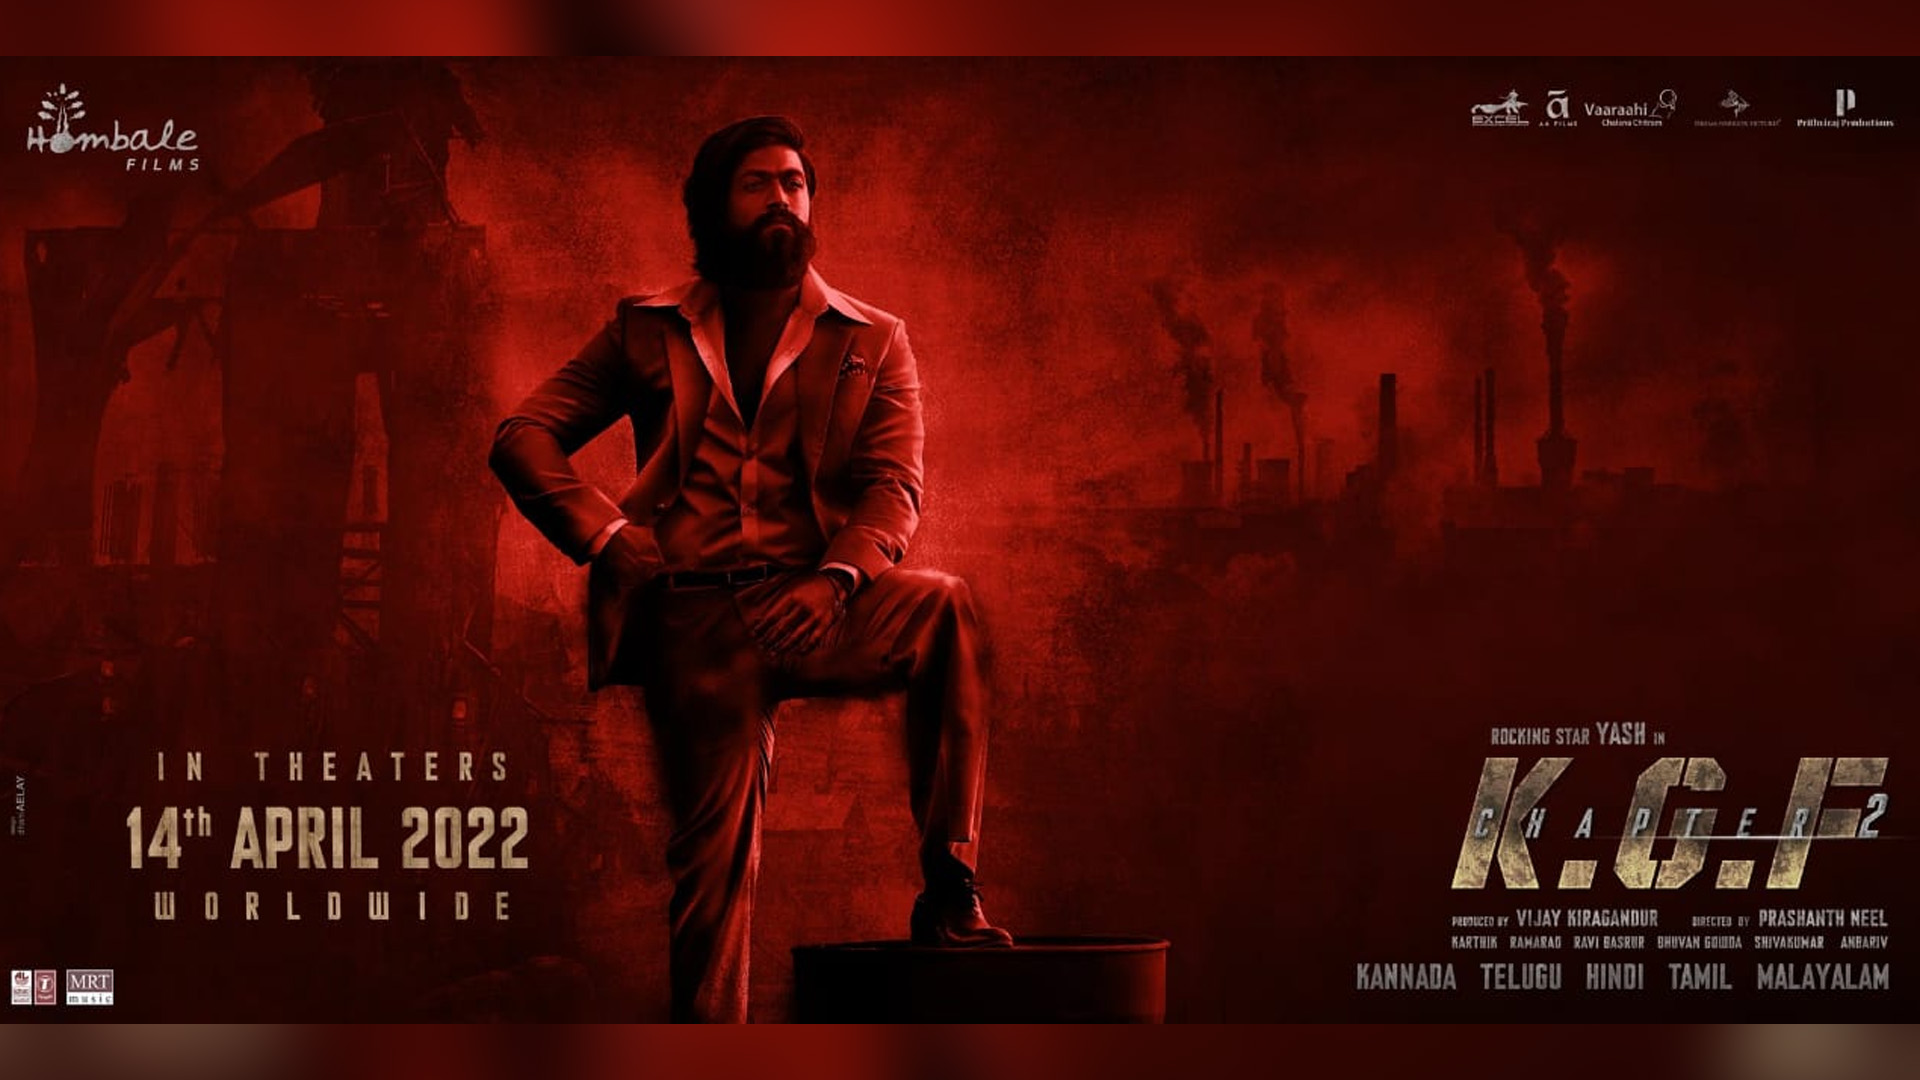 Violence! Violence! Violence! Rocking Star Yash pens most of his own dialogues for ‘KGF: Chapter 2!